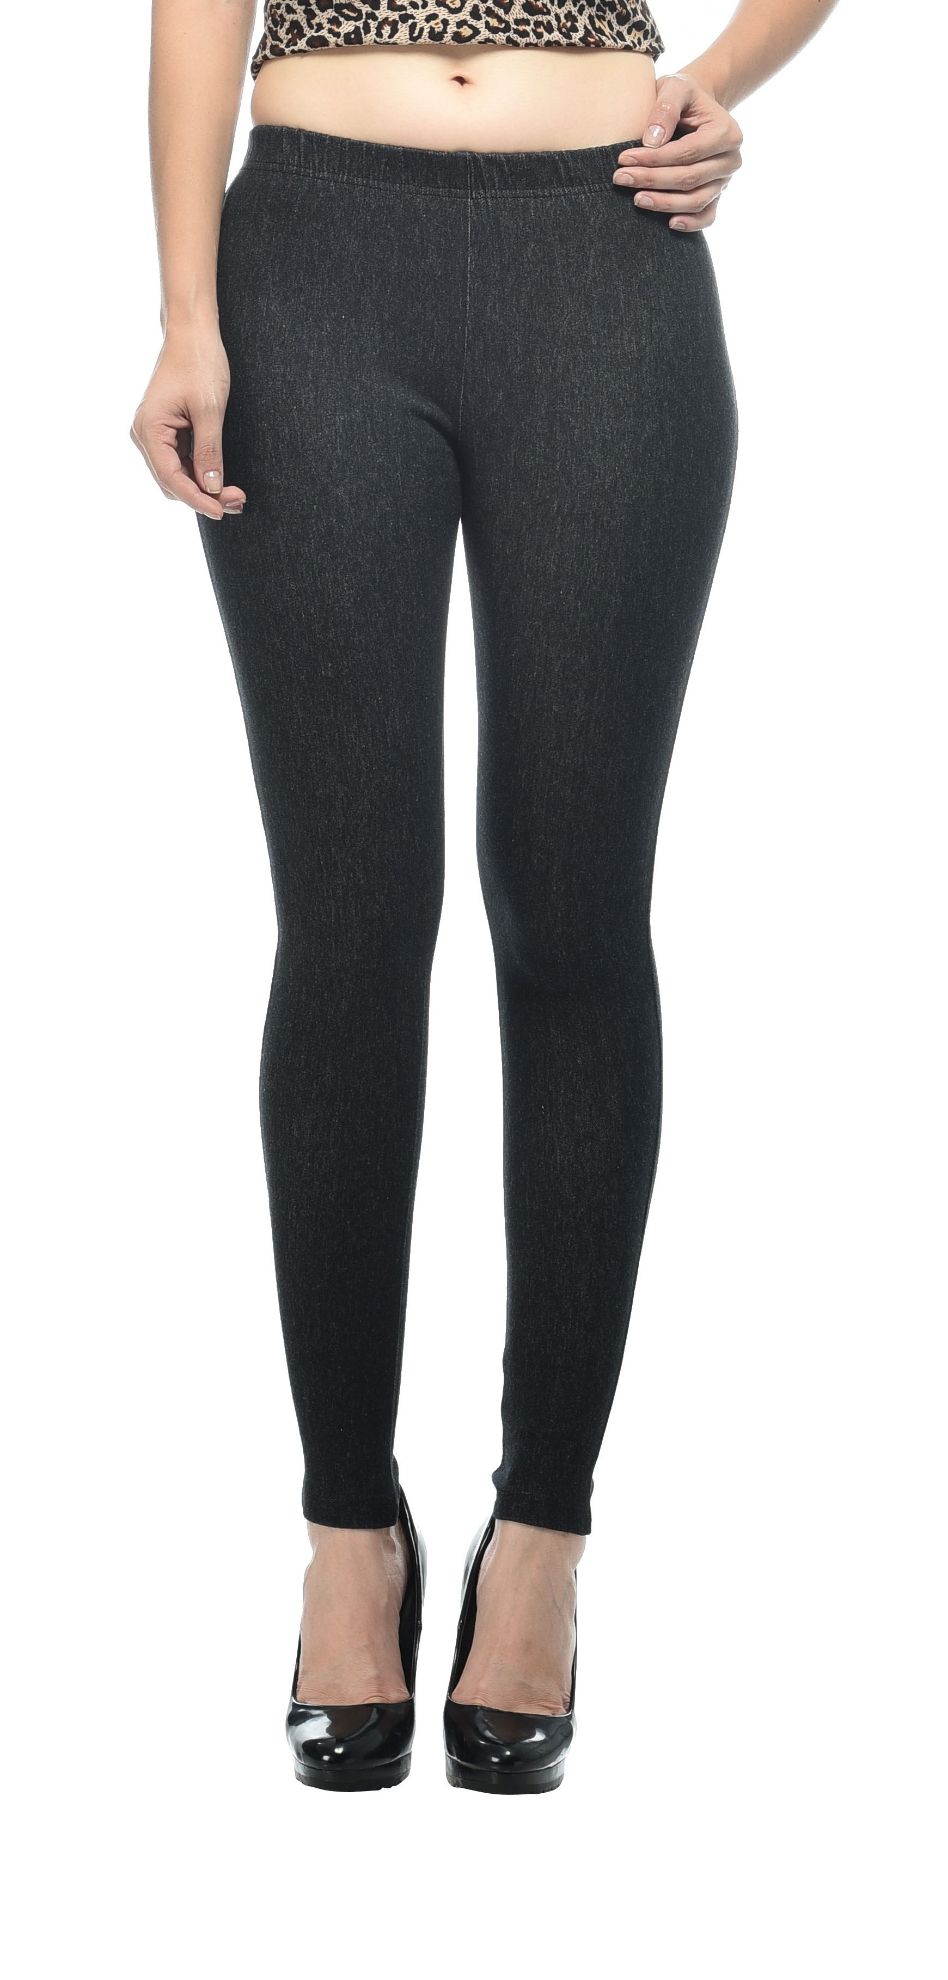 Frenchtrendz  Buy Frenchtrendz Cotton Modal Spandex Black With Back Pocket  Jeggings Online